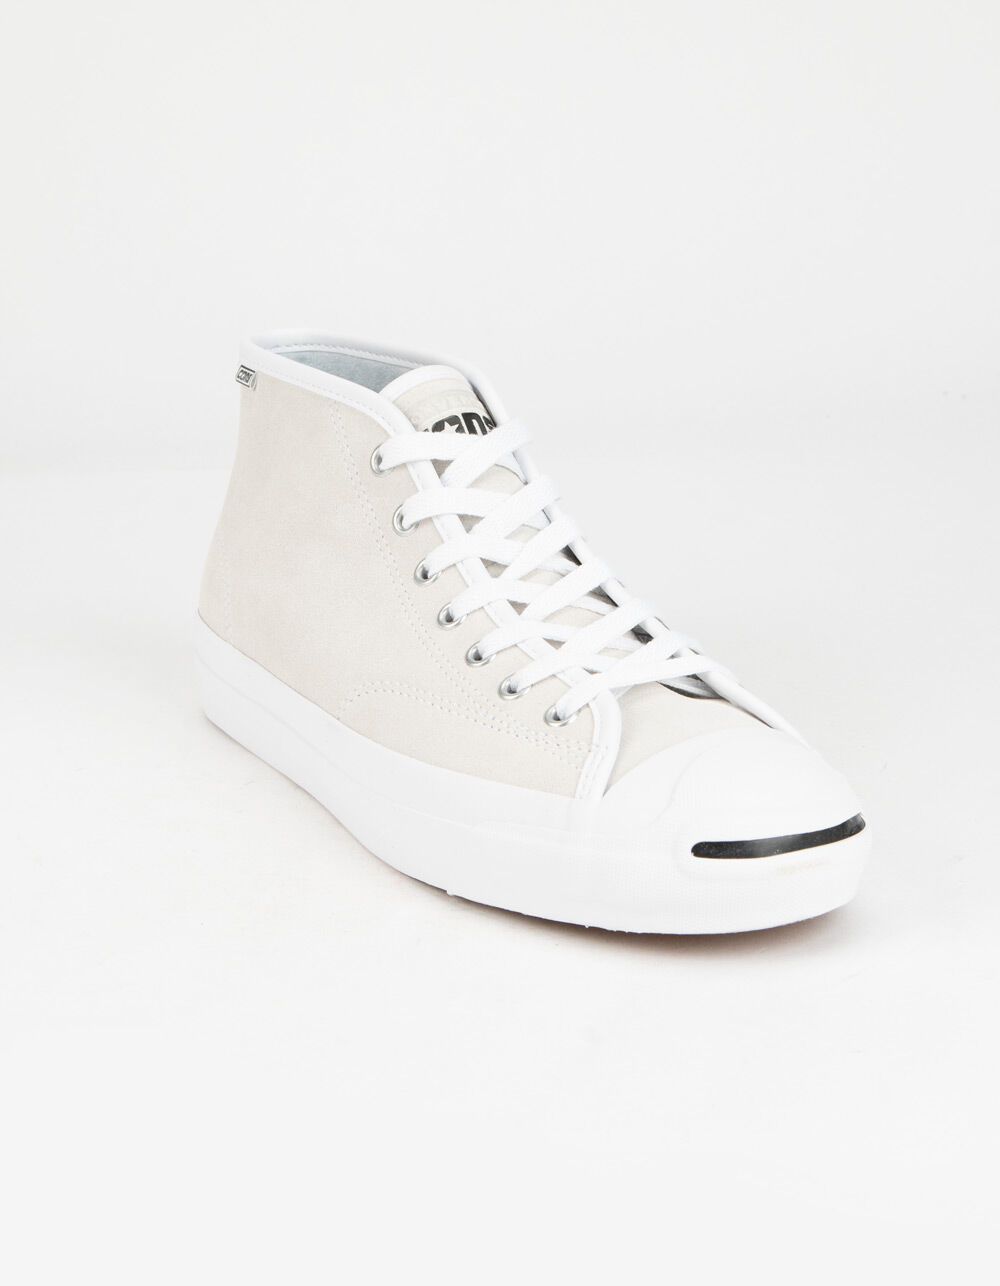 CONVERSE Jack Purcell Mid Mens White Shoes - WHITE | Tillys